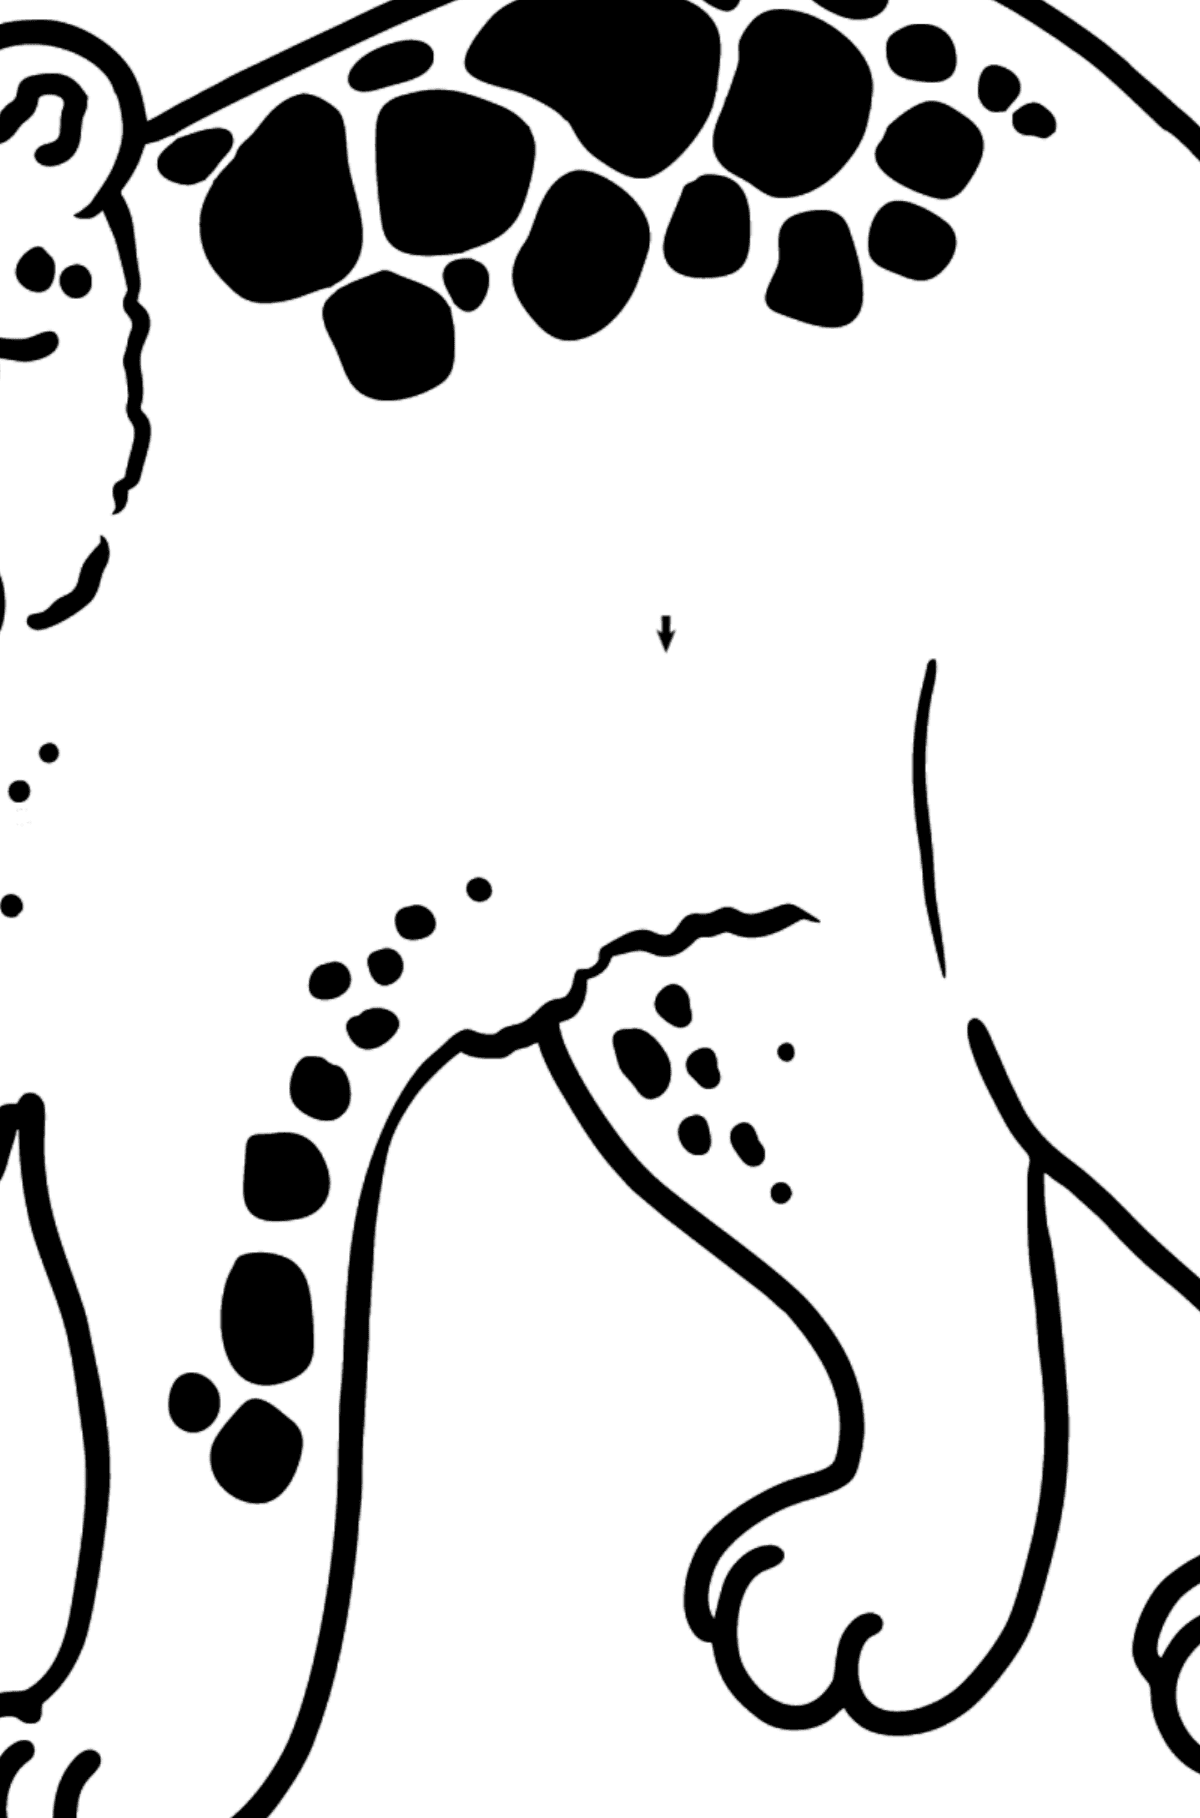 Jaguar coloring page - Coloring by Symbols and Geometric Shapes for Kids